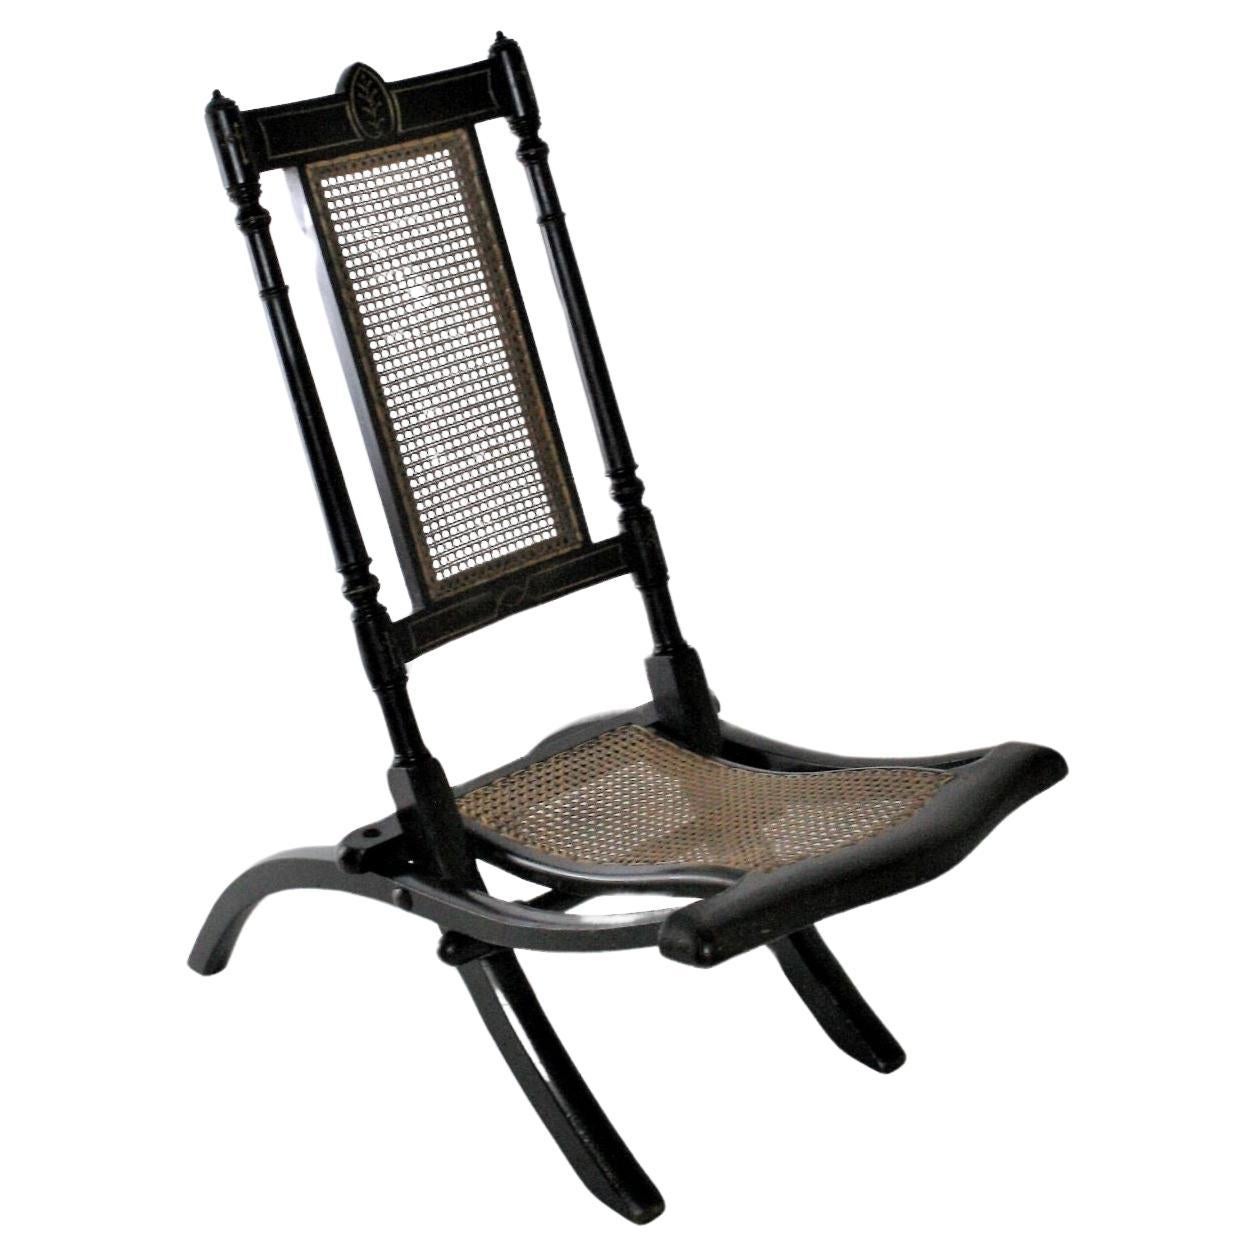 Decorative Folding Victorian Chair with Cane Seat Ebonised with Gilt detailing